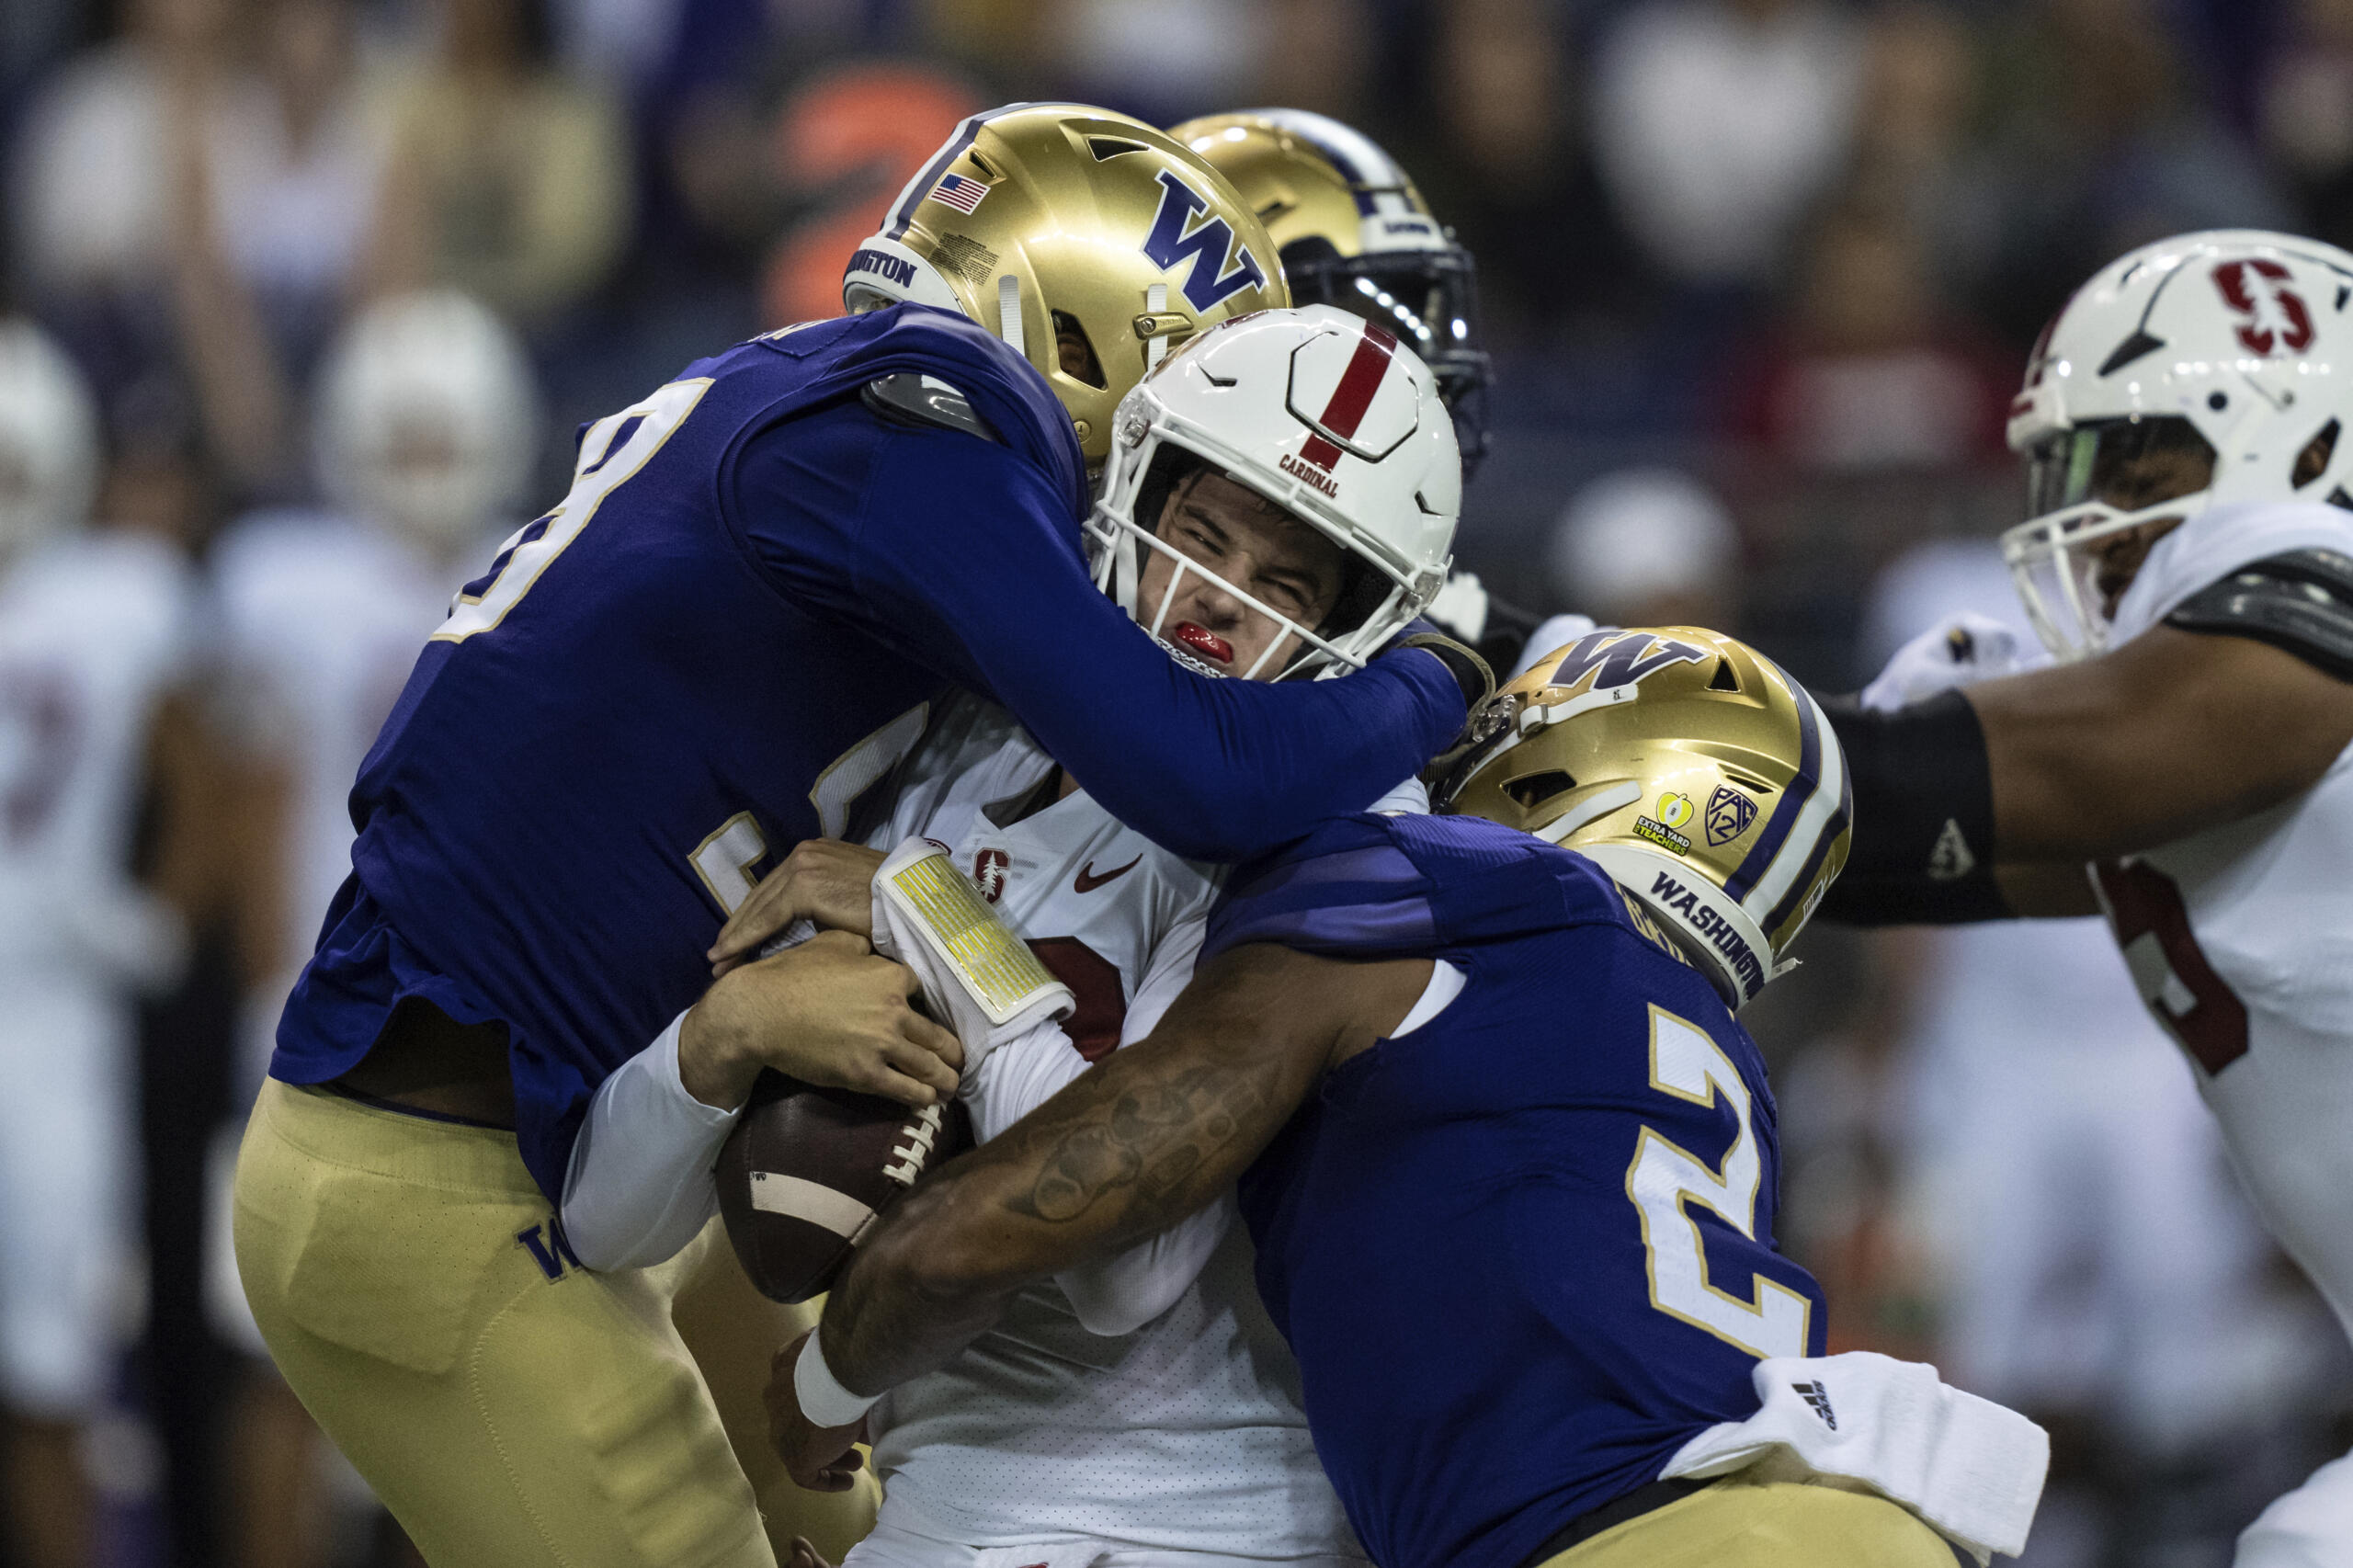 Washington's Zion Tupuola-Fetui, left, and Cam Bright, right, sack Stanford quarterback Tanner McKee during the first half of an NCAA college football game Saturday, Sept. 24, 2022, in Seattle.